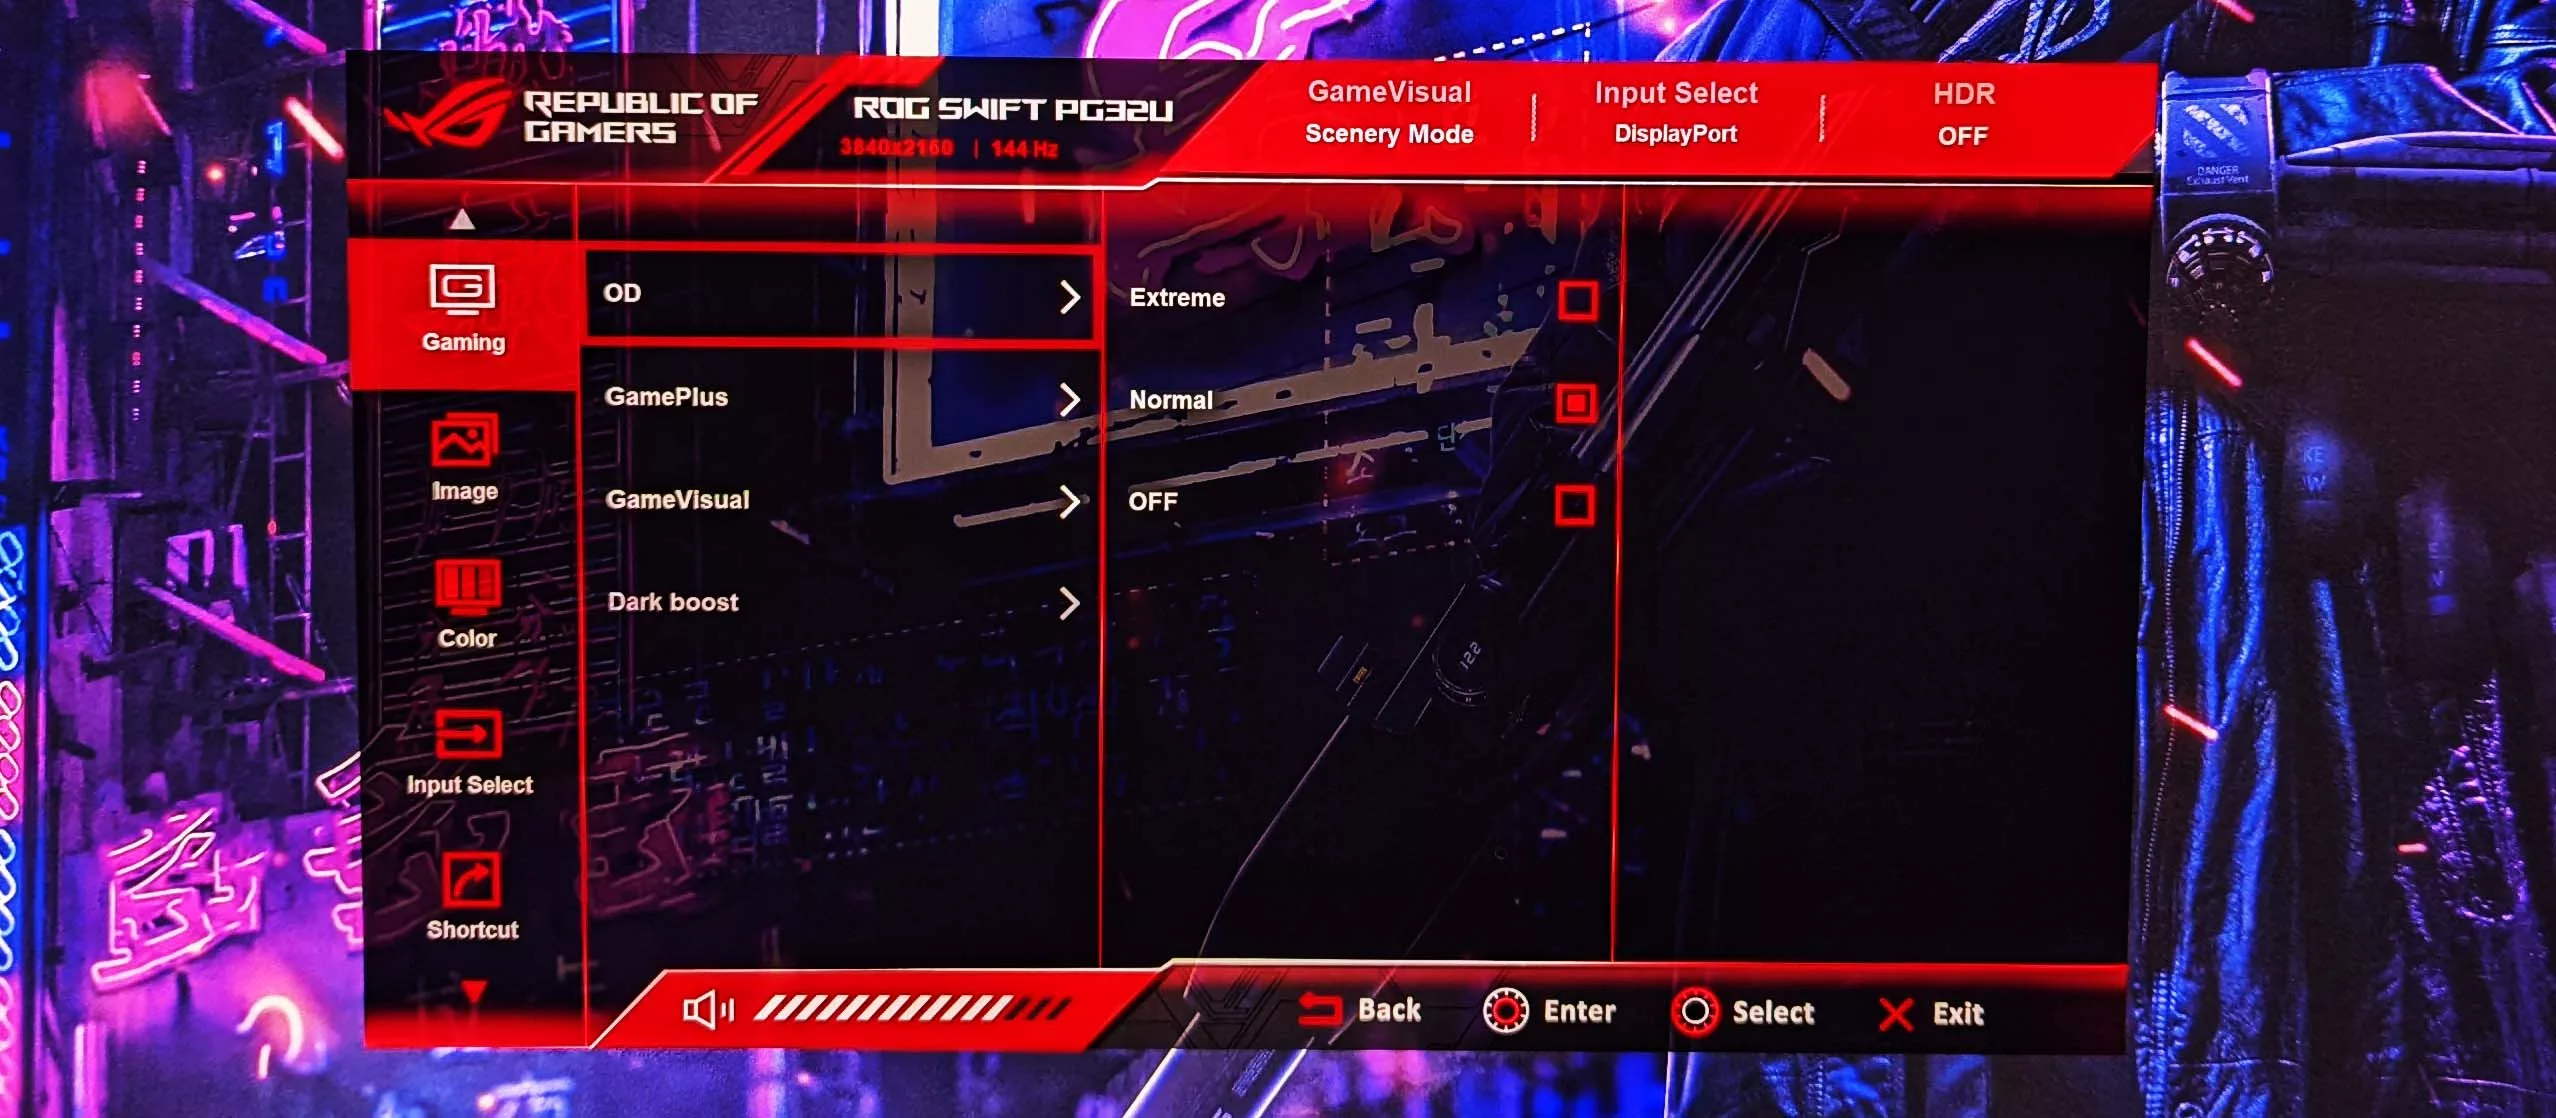 A photo of an ROG monitor's overdrive setting, with three options: Extreme, Normal, and Off.